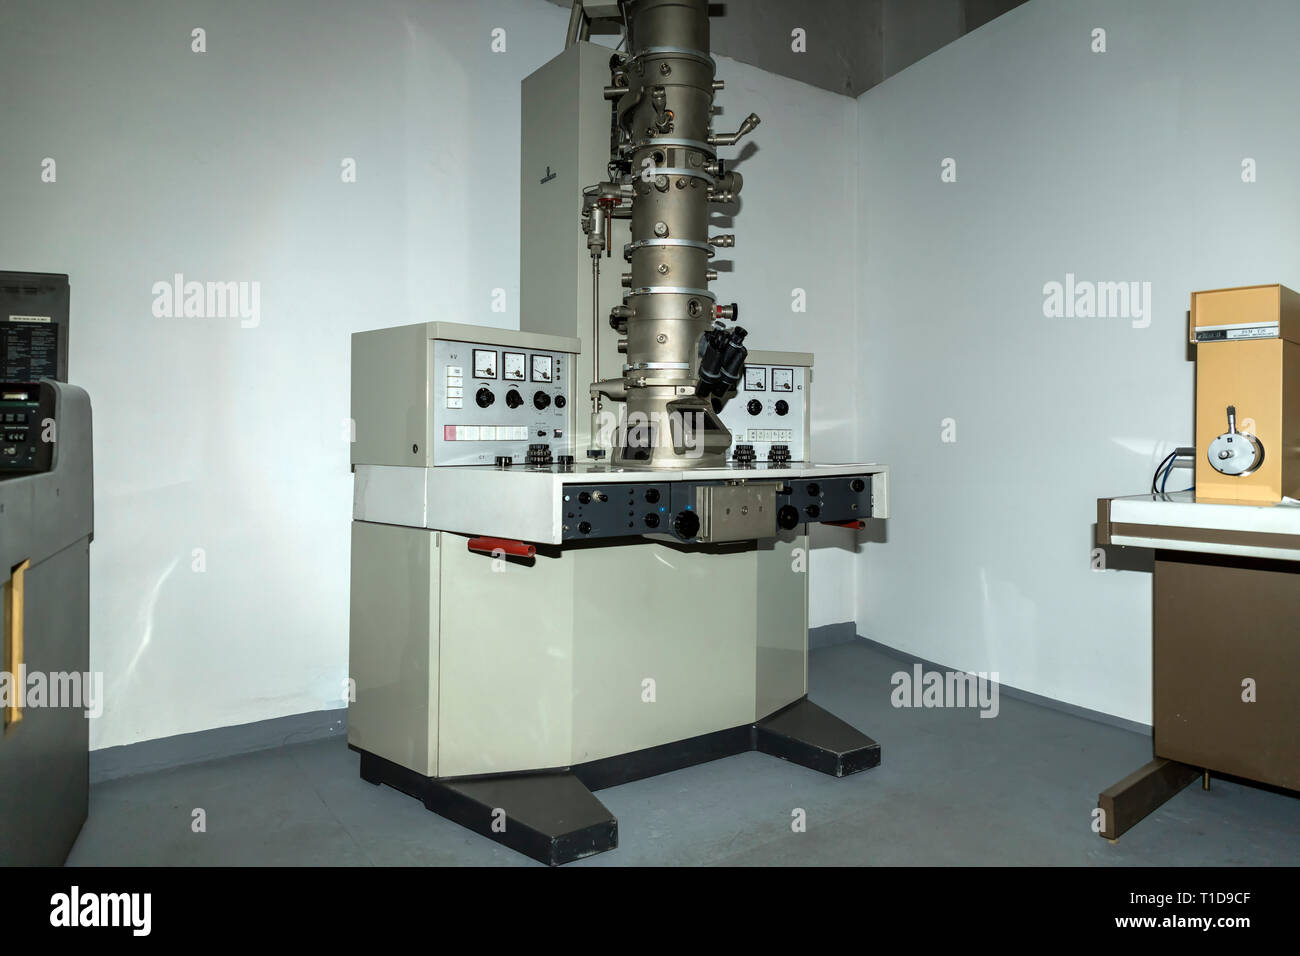 Belgrade, Serbia, March 2019 - Transmission Electron Microscope made by Siemens in 1970s exposed in the Museum of Science and Technology Stock Photo